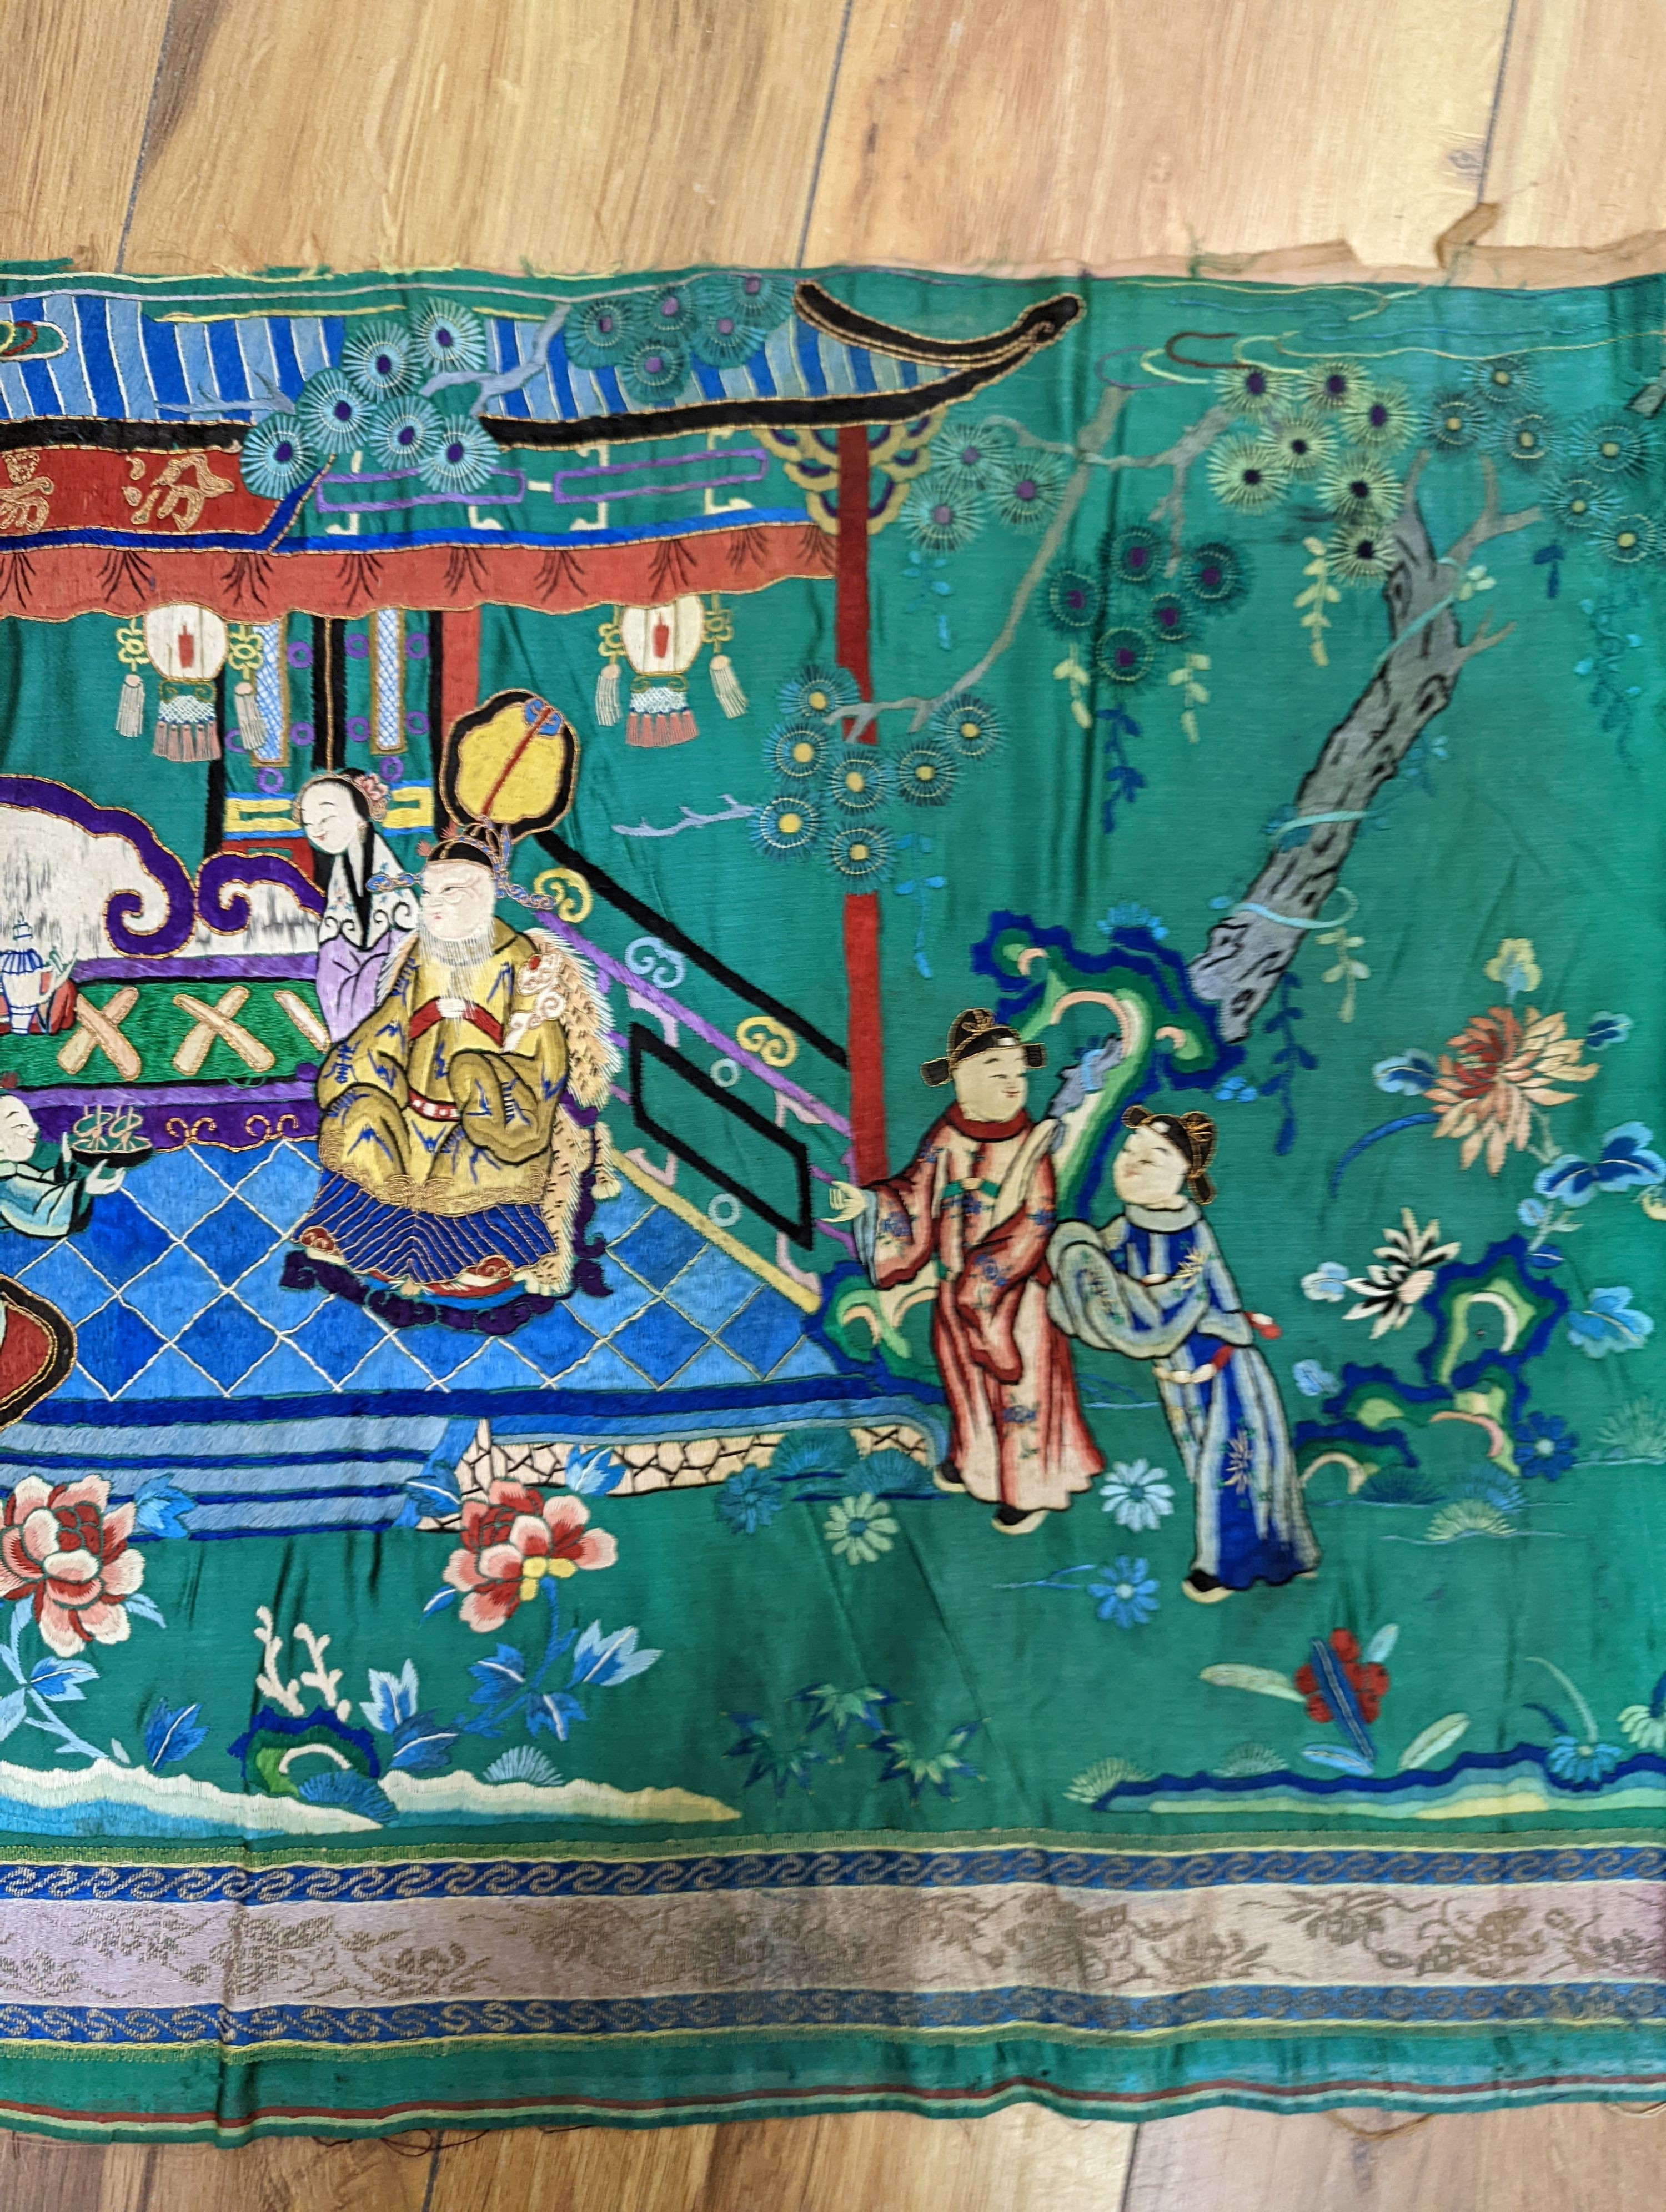 An early 20th century Chinese silk figurative embroidery from a larger panel of an emperor and empress scene.